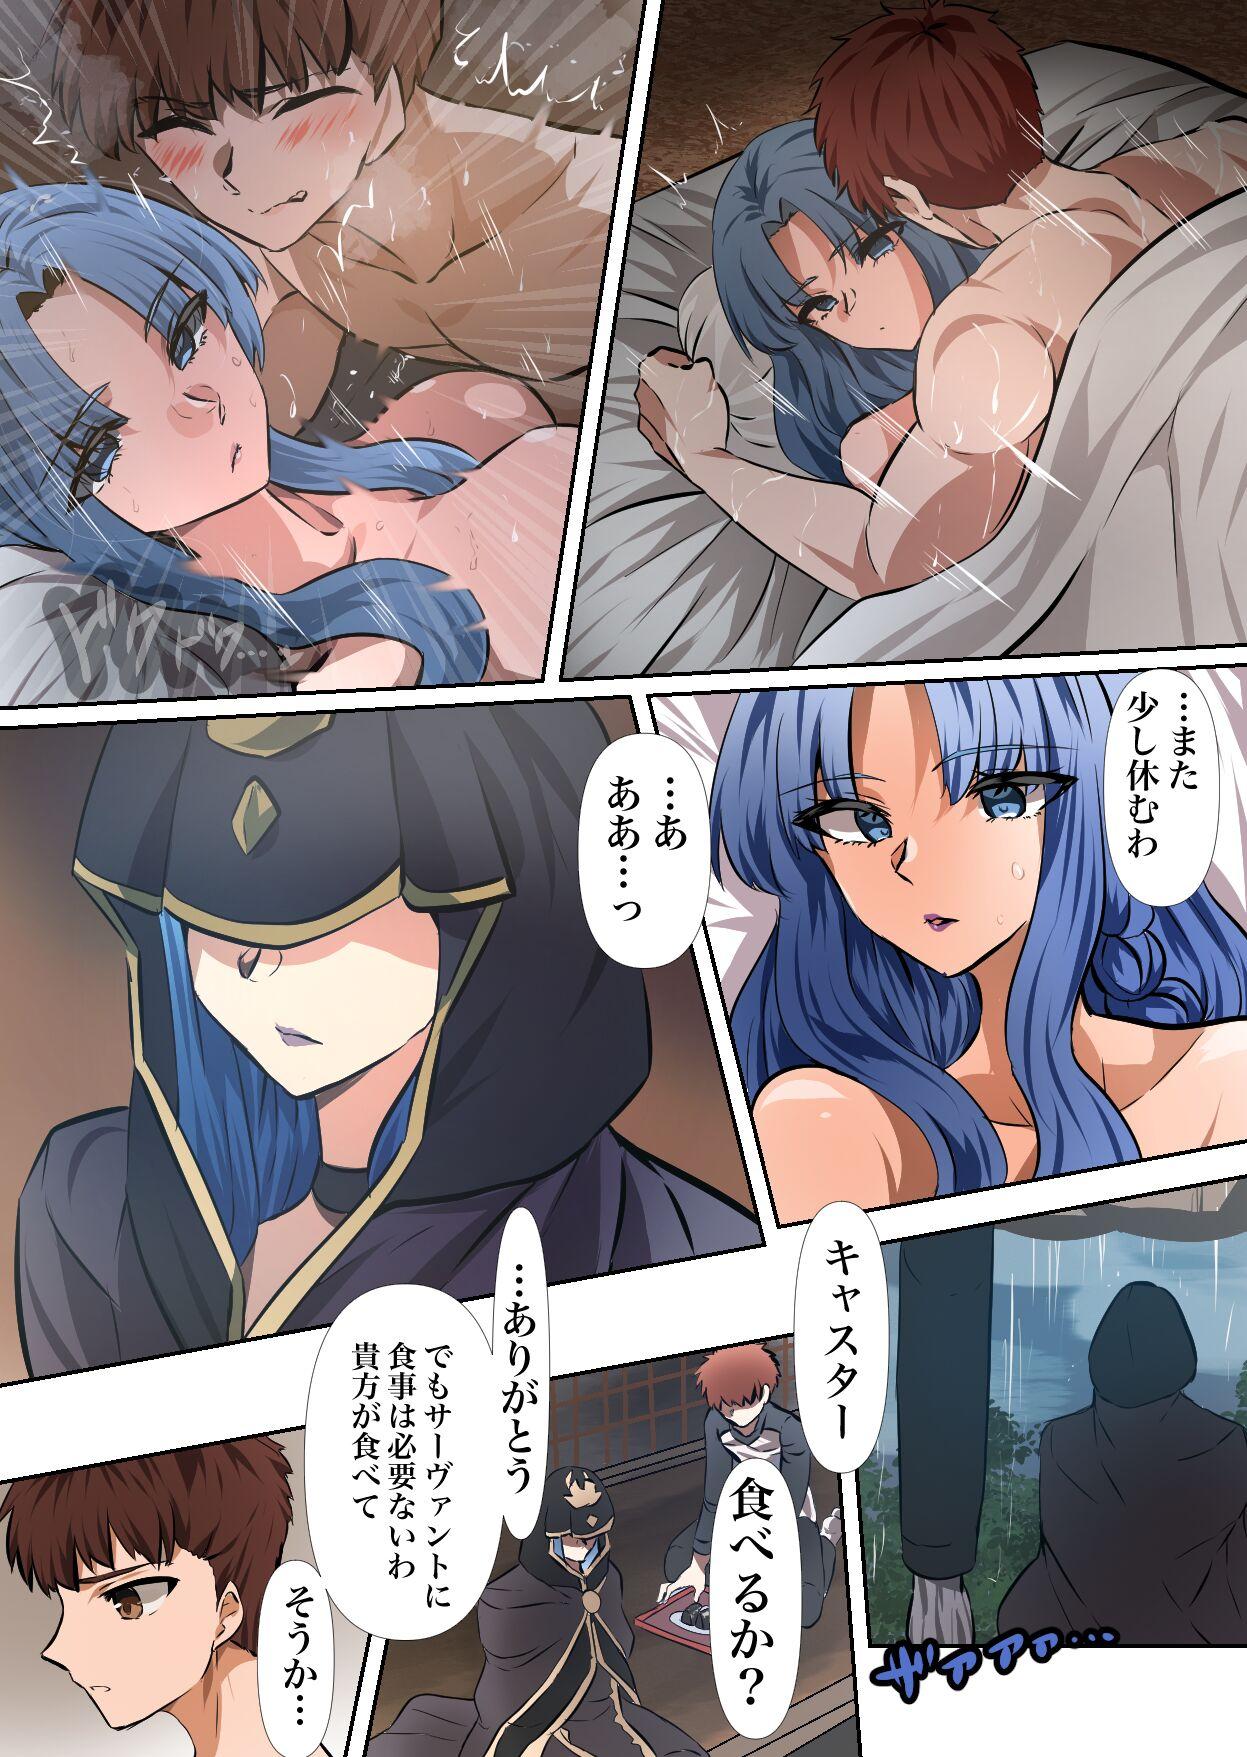 Creampies if Caster to Emiya Shirou - Fate stay night Interview - Page 2